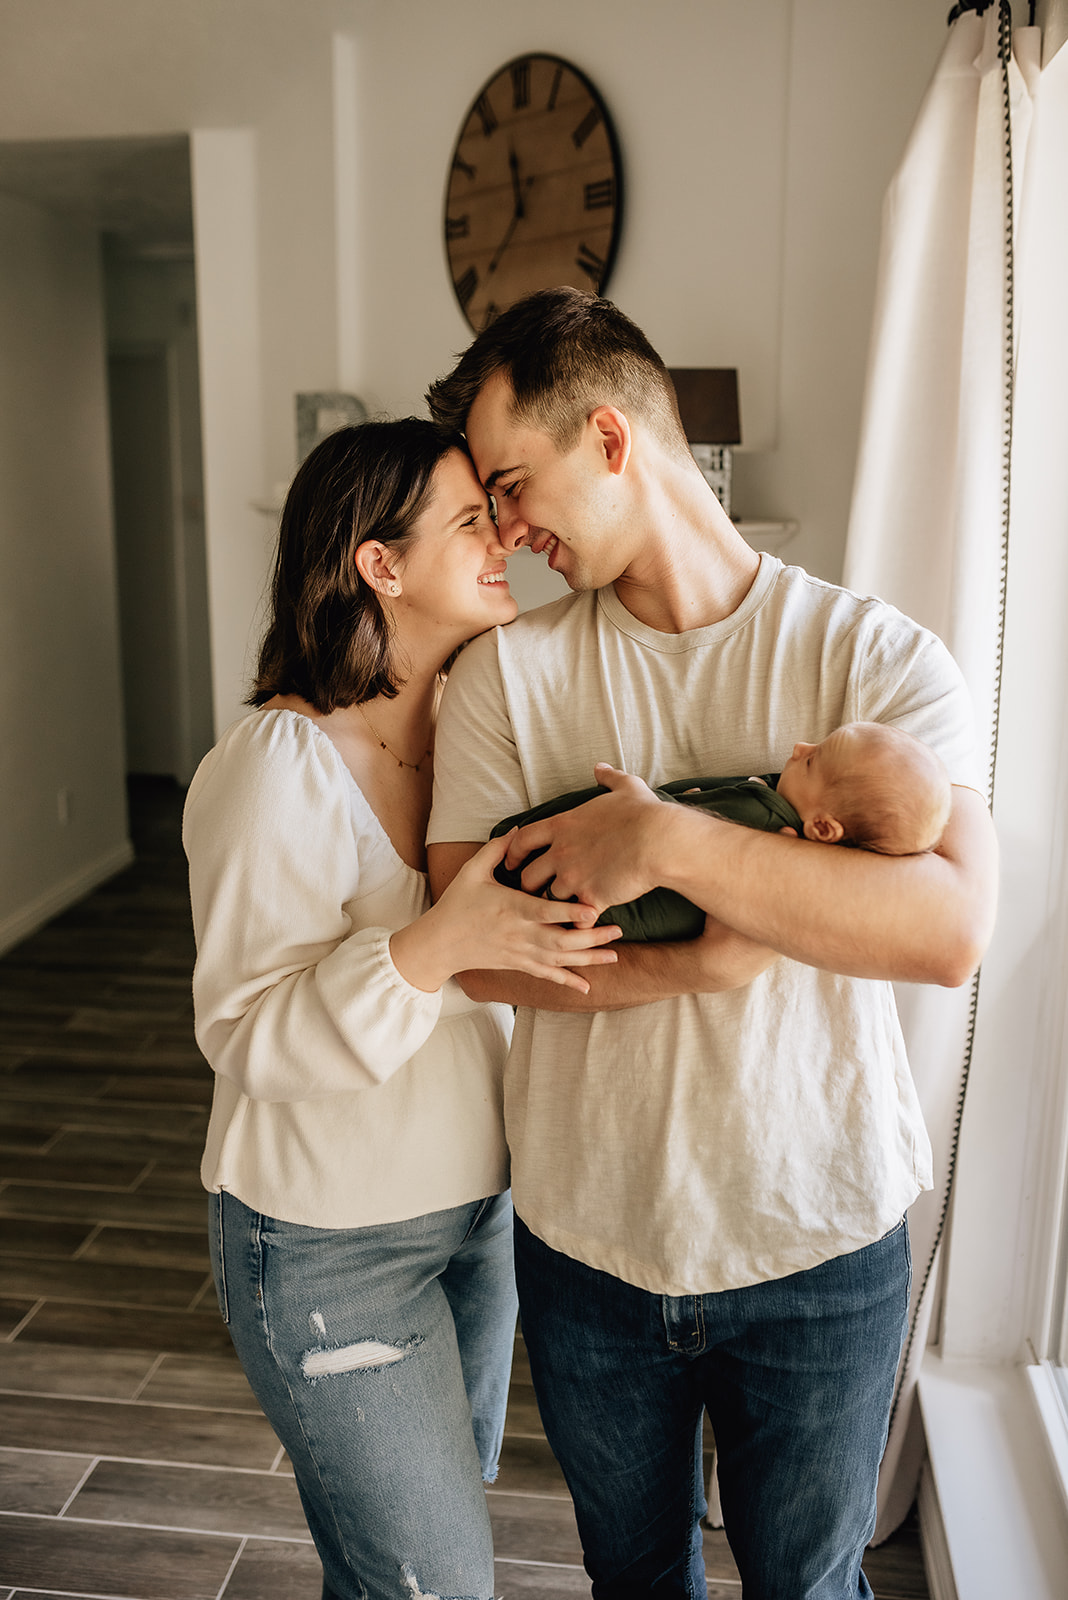 New parents press their foreheads together while dad cradles their newborn baby against his chest Midwife in The Heights